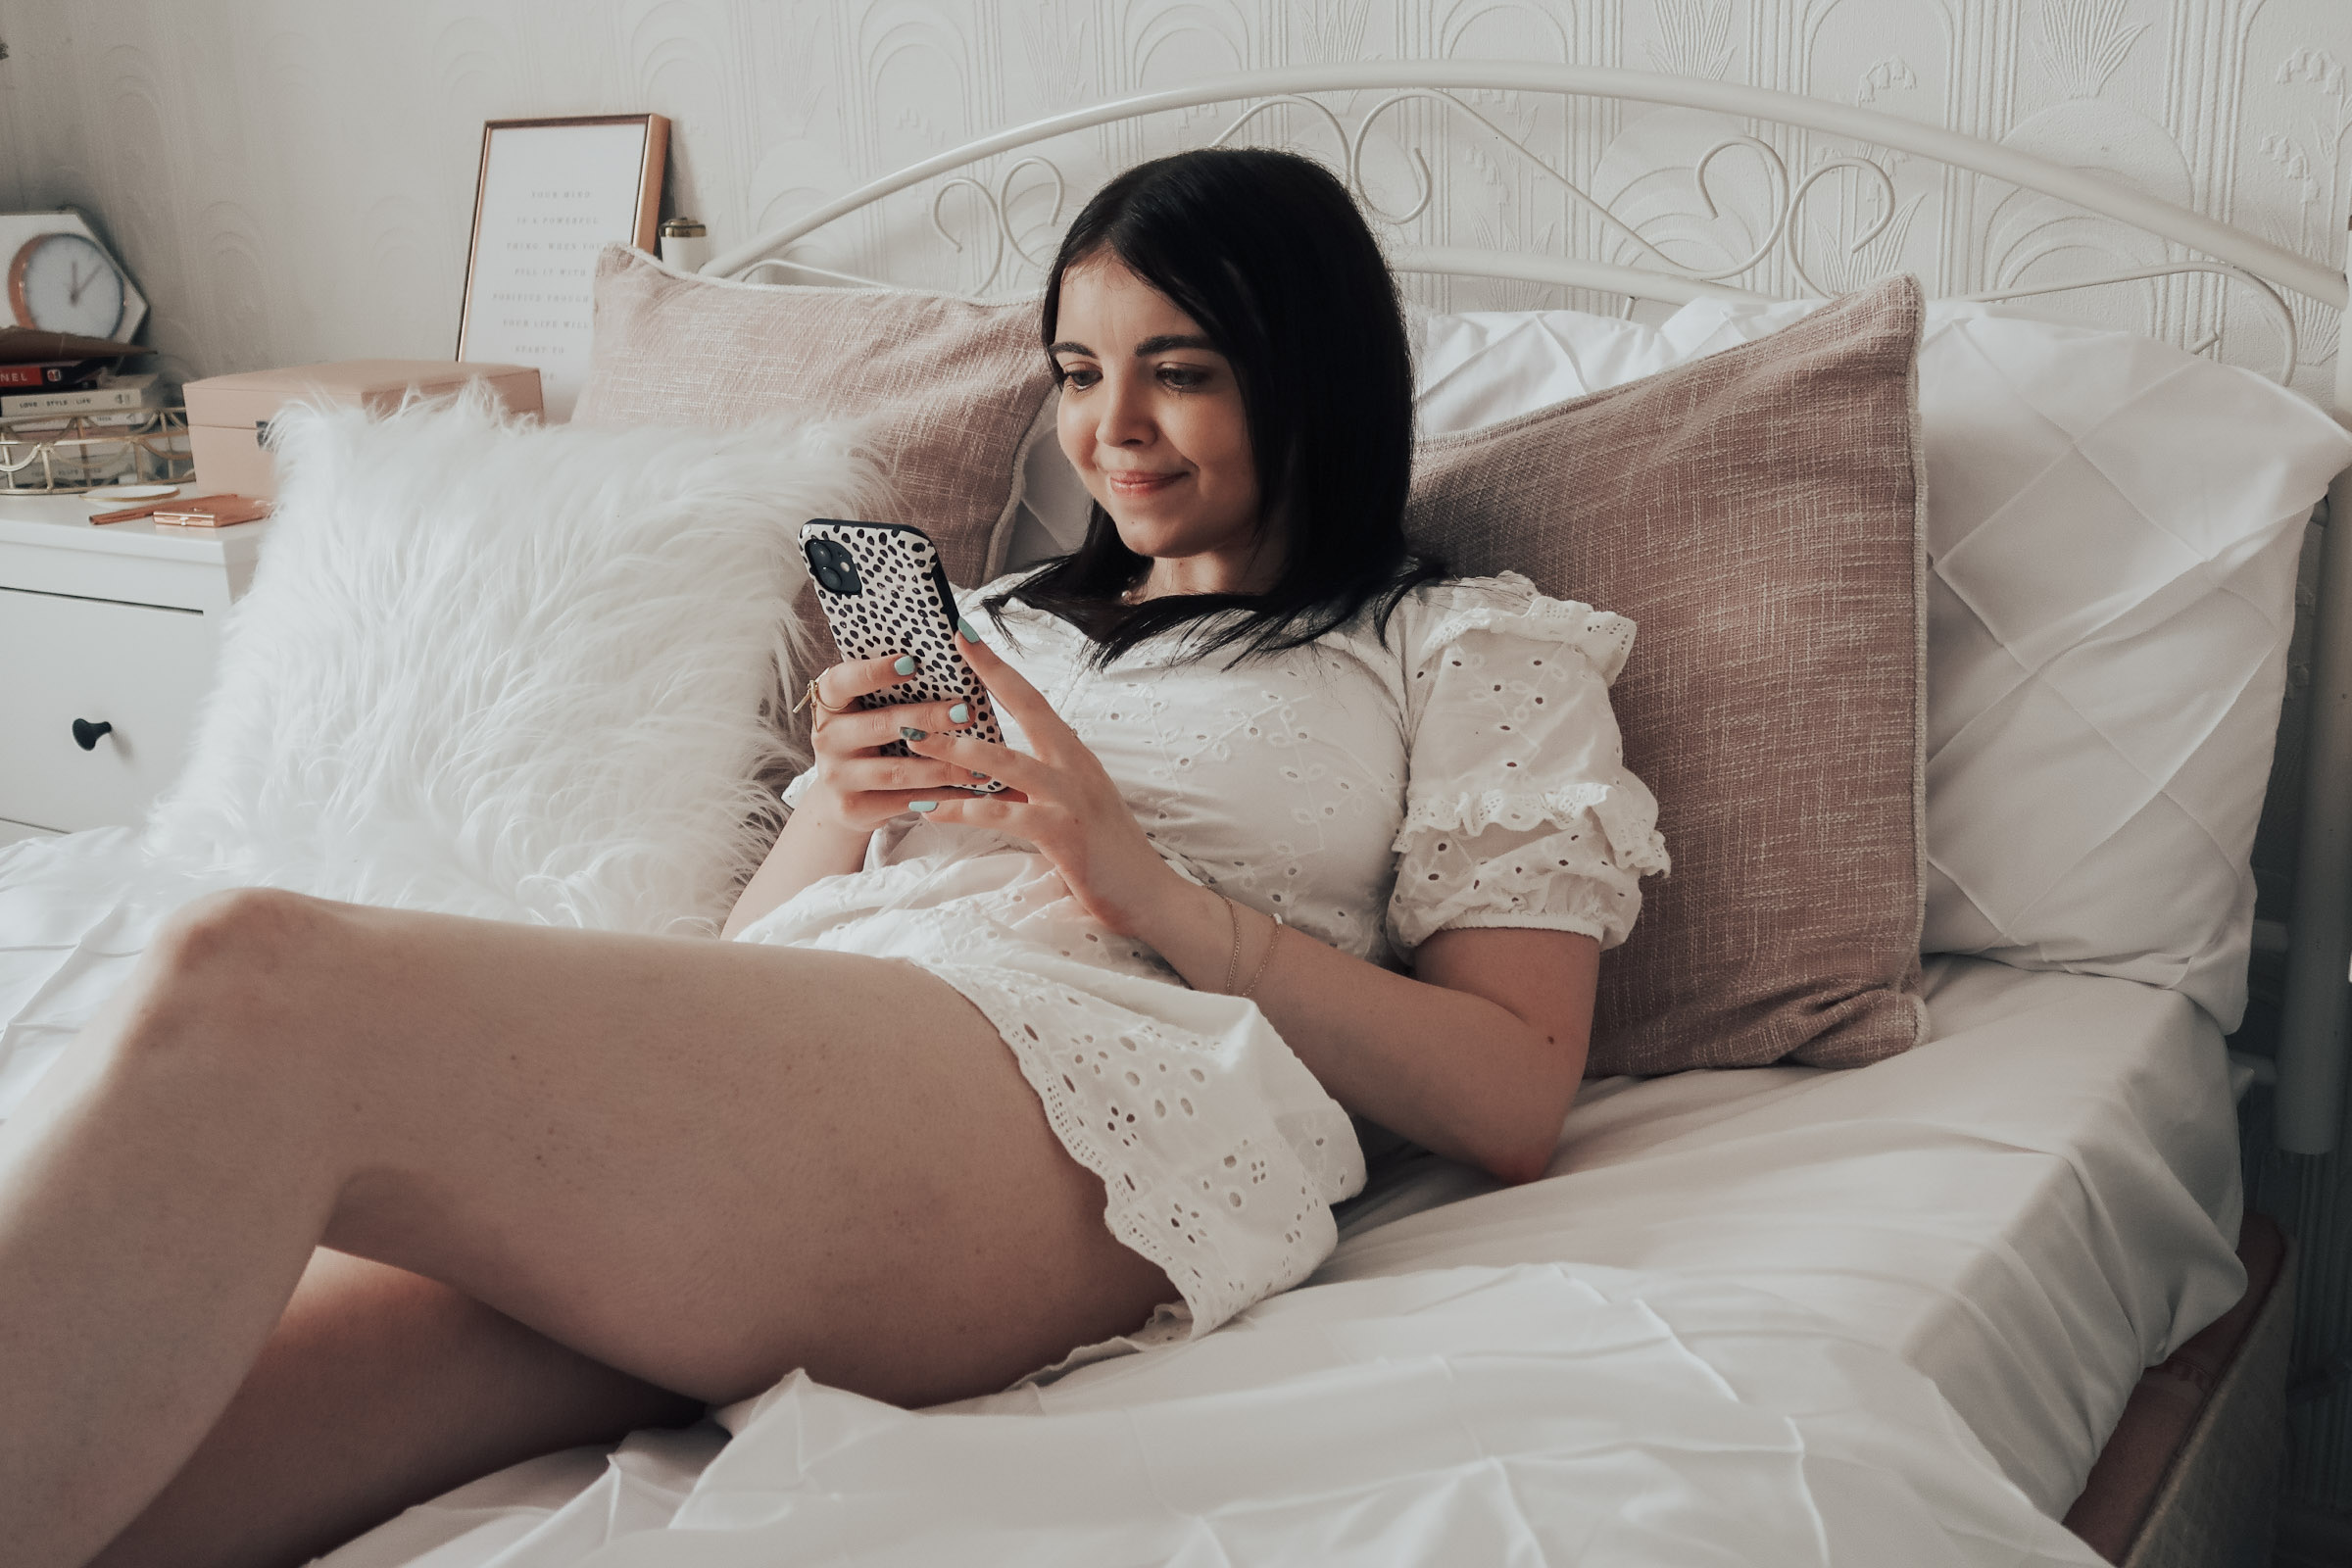 A woman lying on bed holding an Iphone